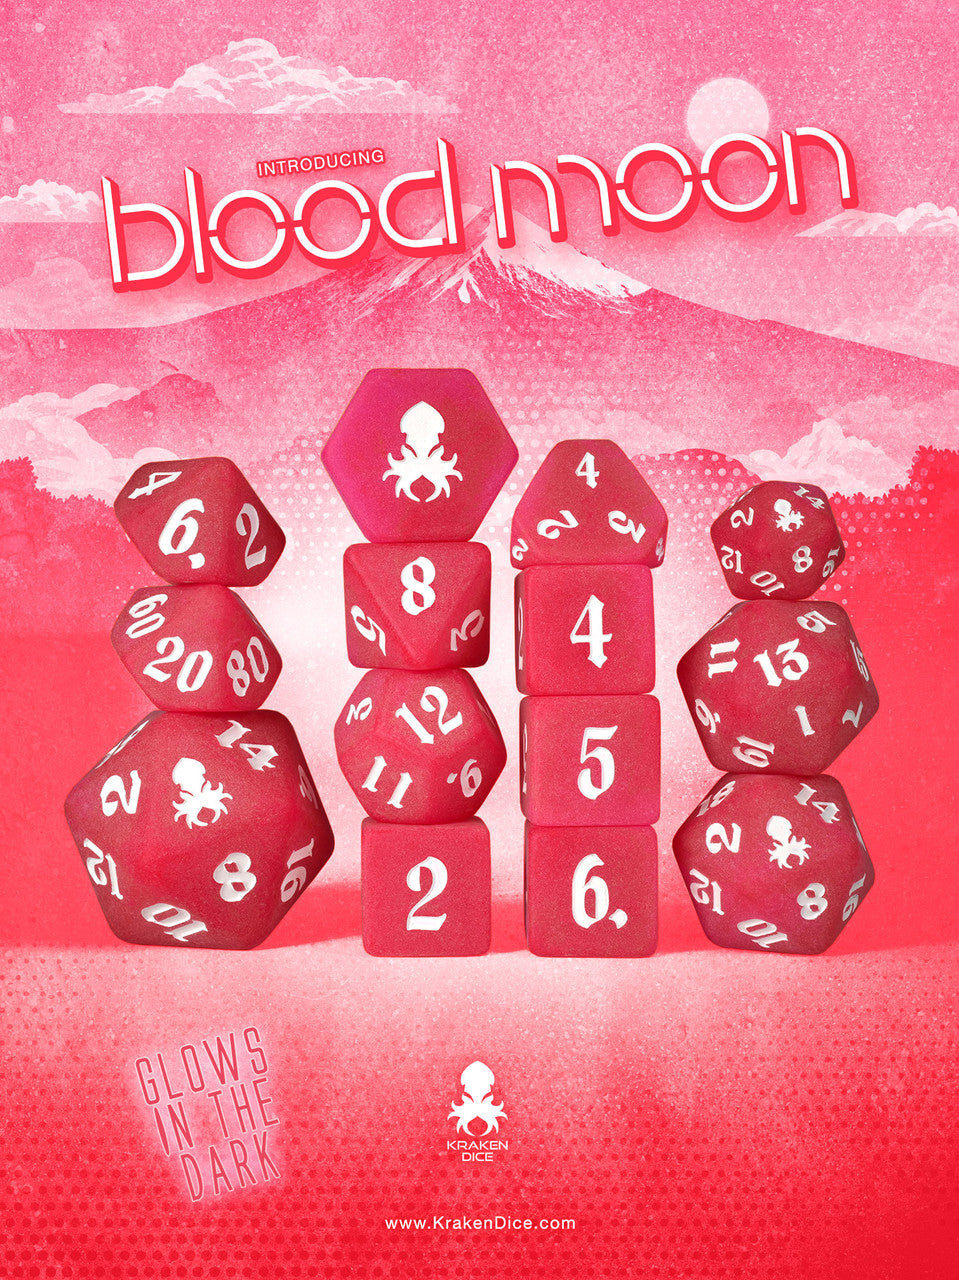 Blood Moon Glow in the Dark 14pc Dice Set inked in White